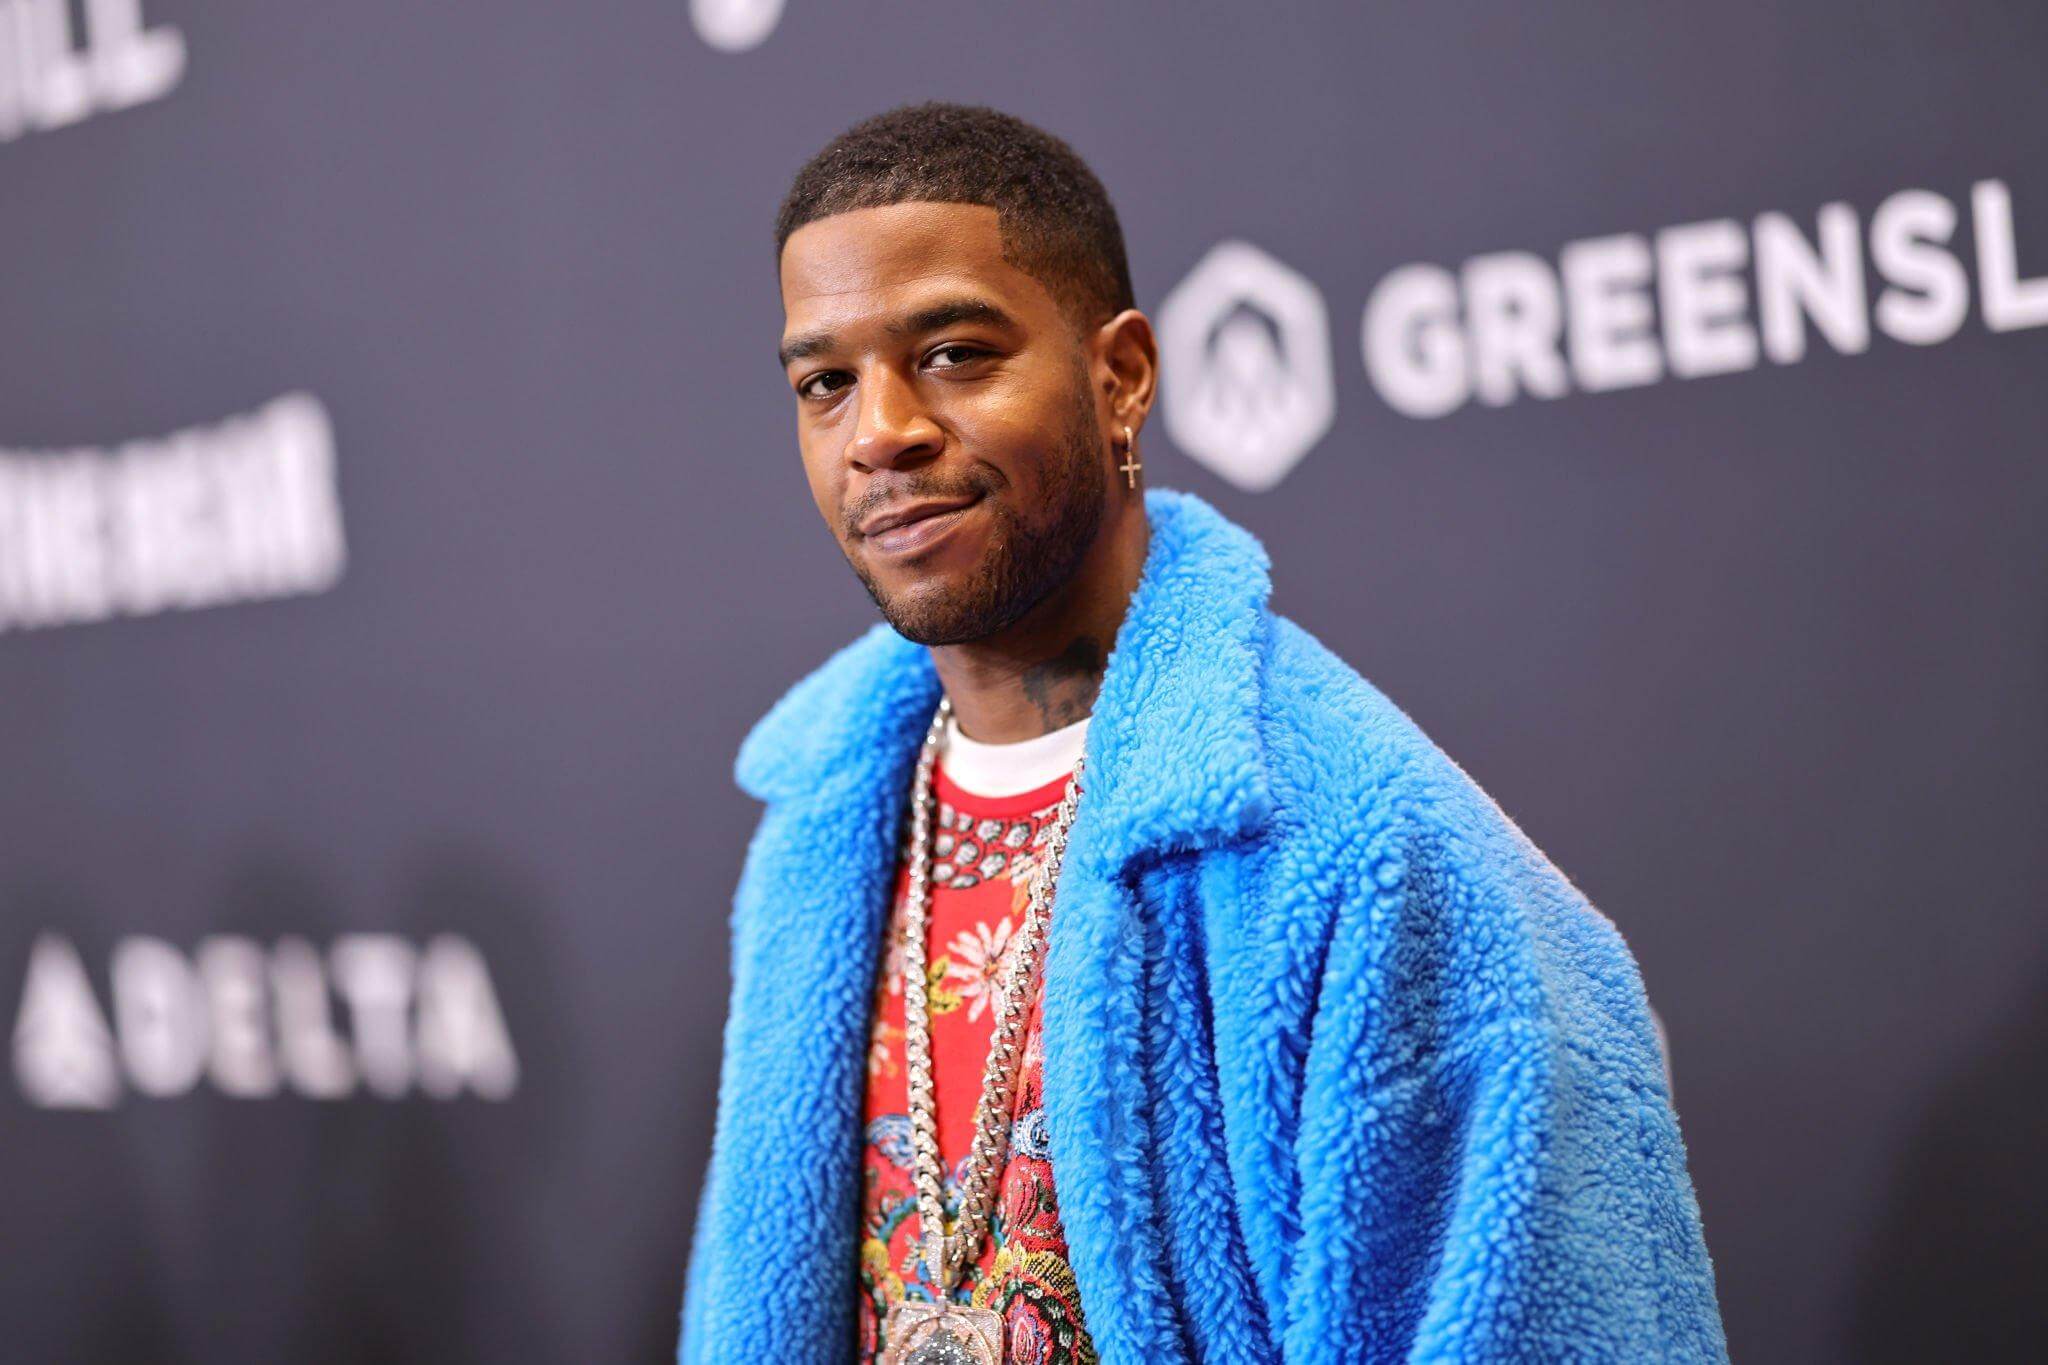 Kid Cudi addresses rumors about his sexuality